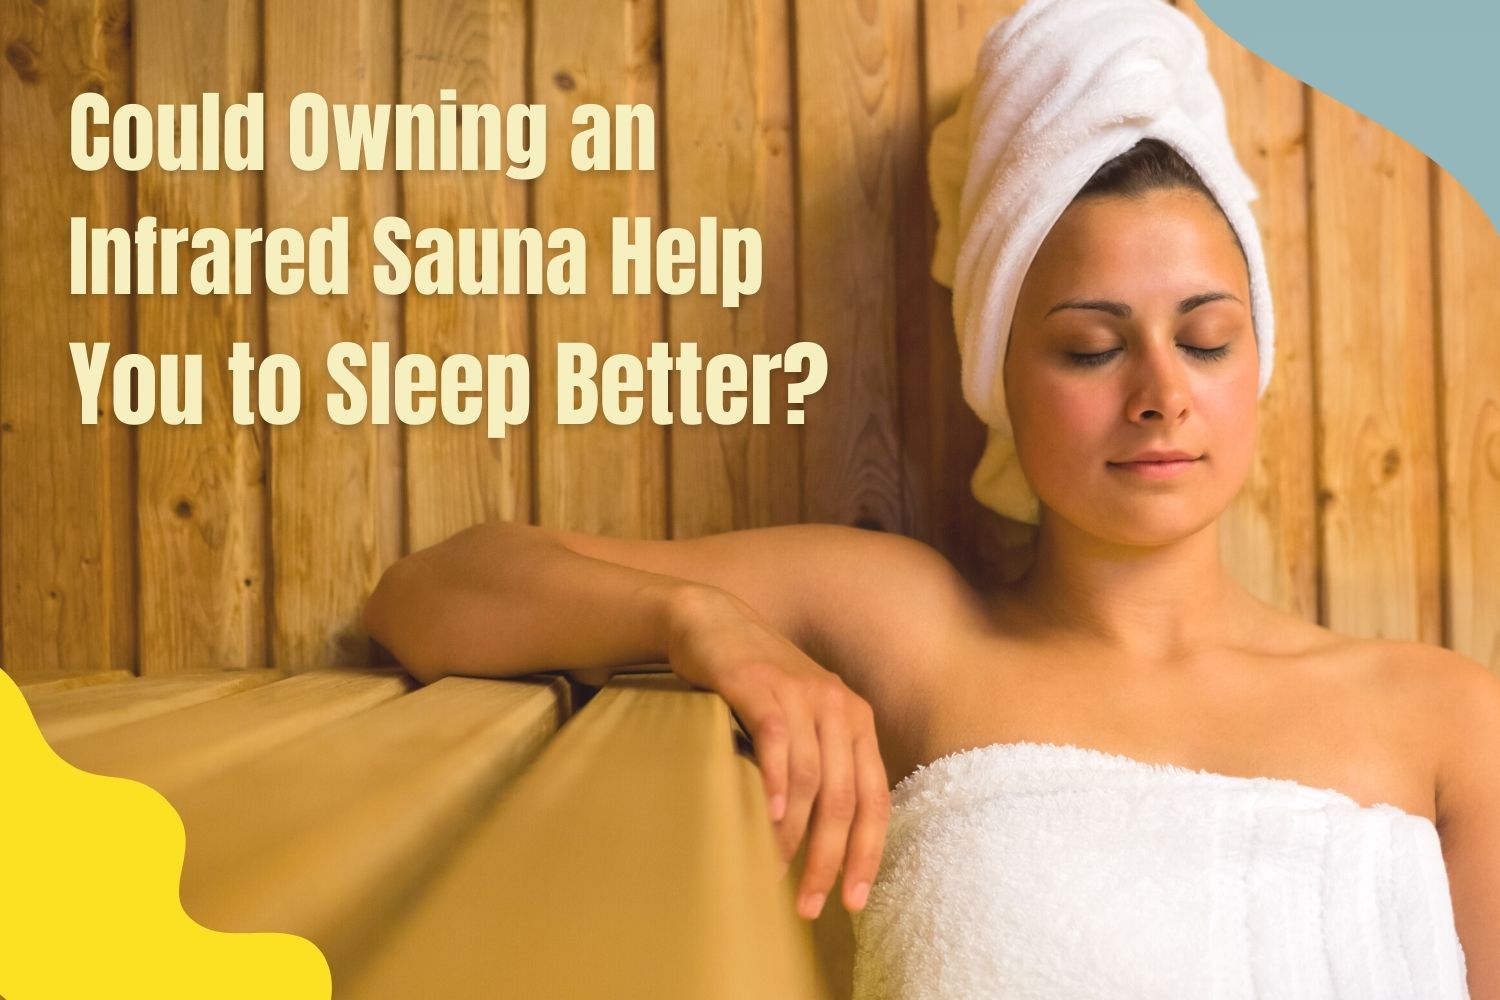 Does Owning a Sauna help you to sleep better?